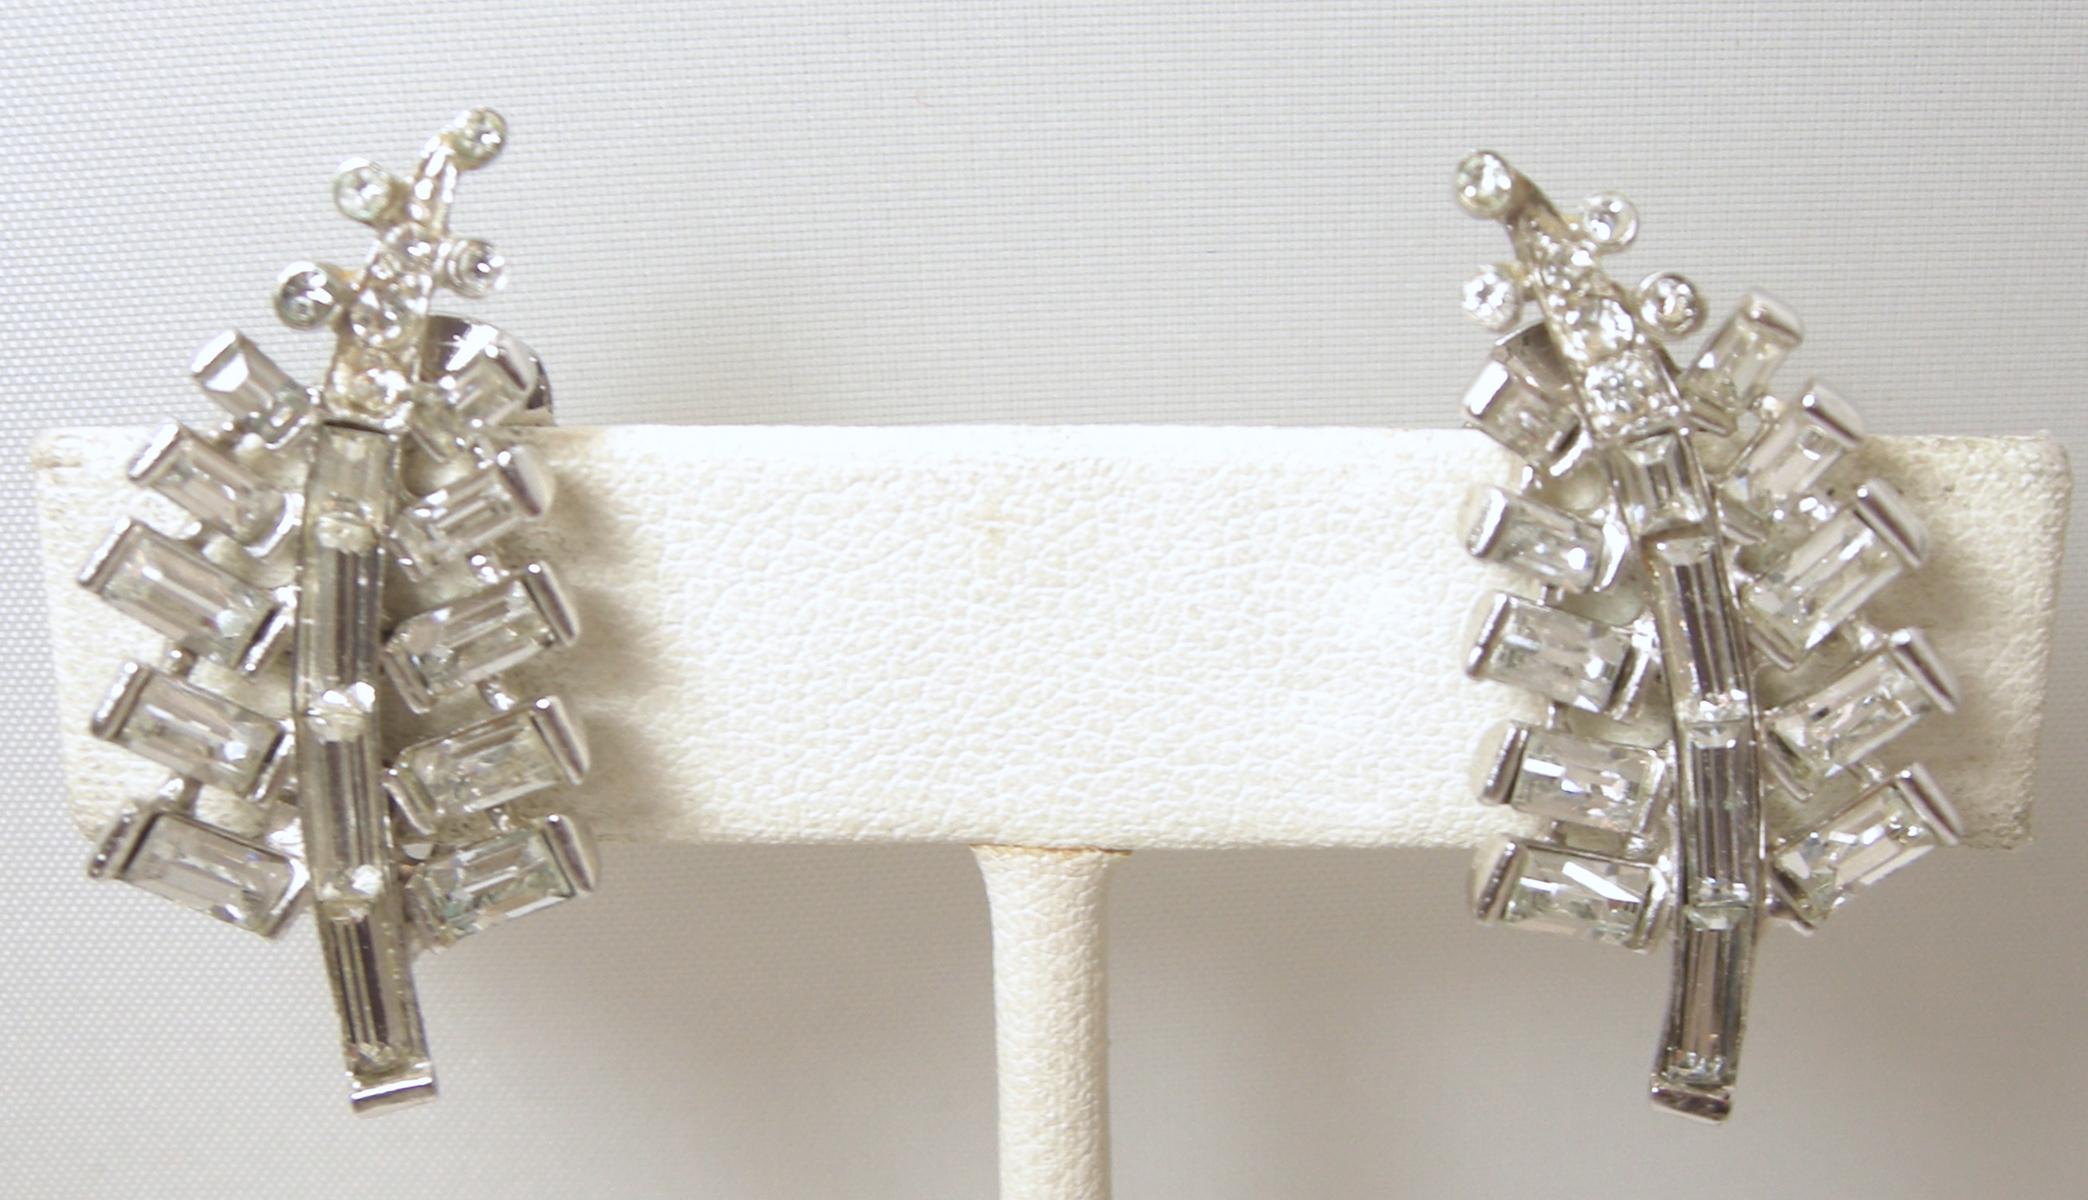 These beautiful vintage crystal clip earrings have a leaf design in a sterling silver setting. They are made with stunning baguette crystals. They measure 1-1/4” long x 5/8” wide.  They are signed “Sterling” and in excellent condition.